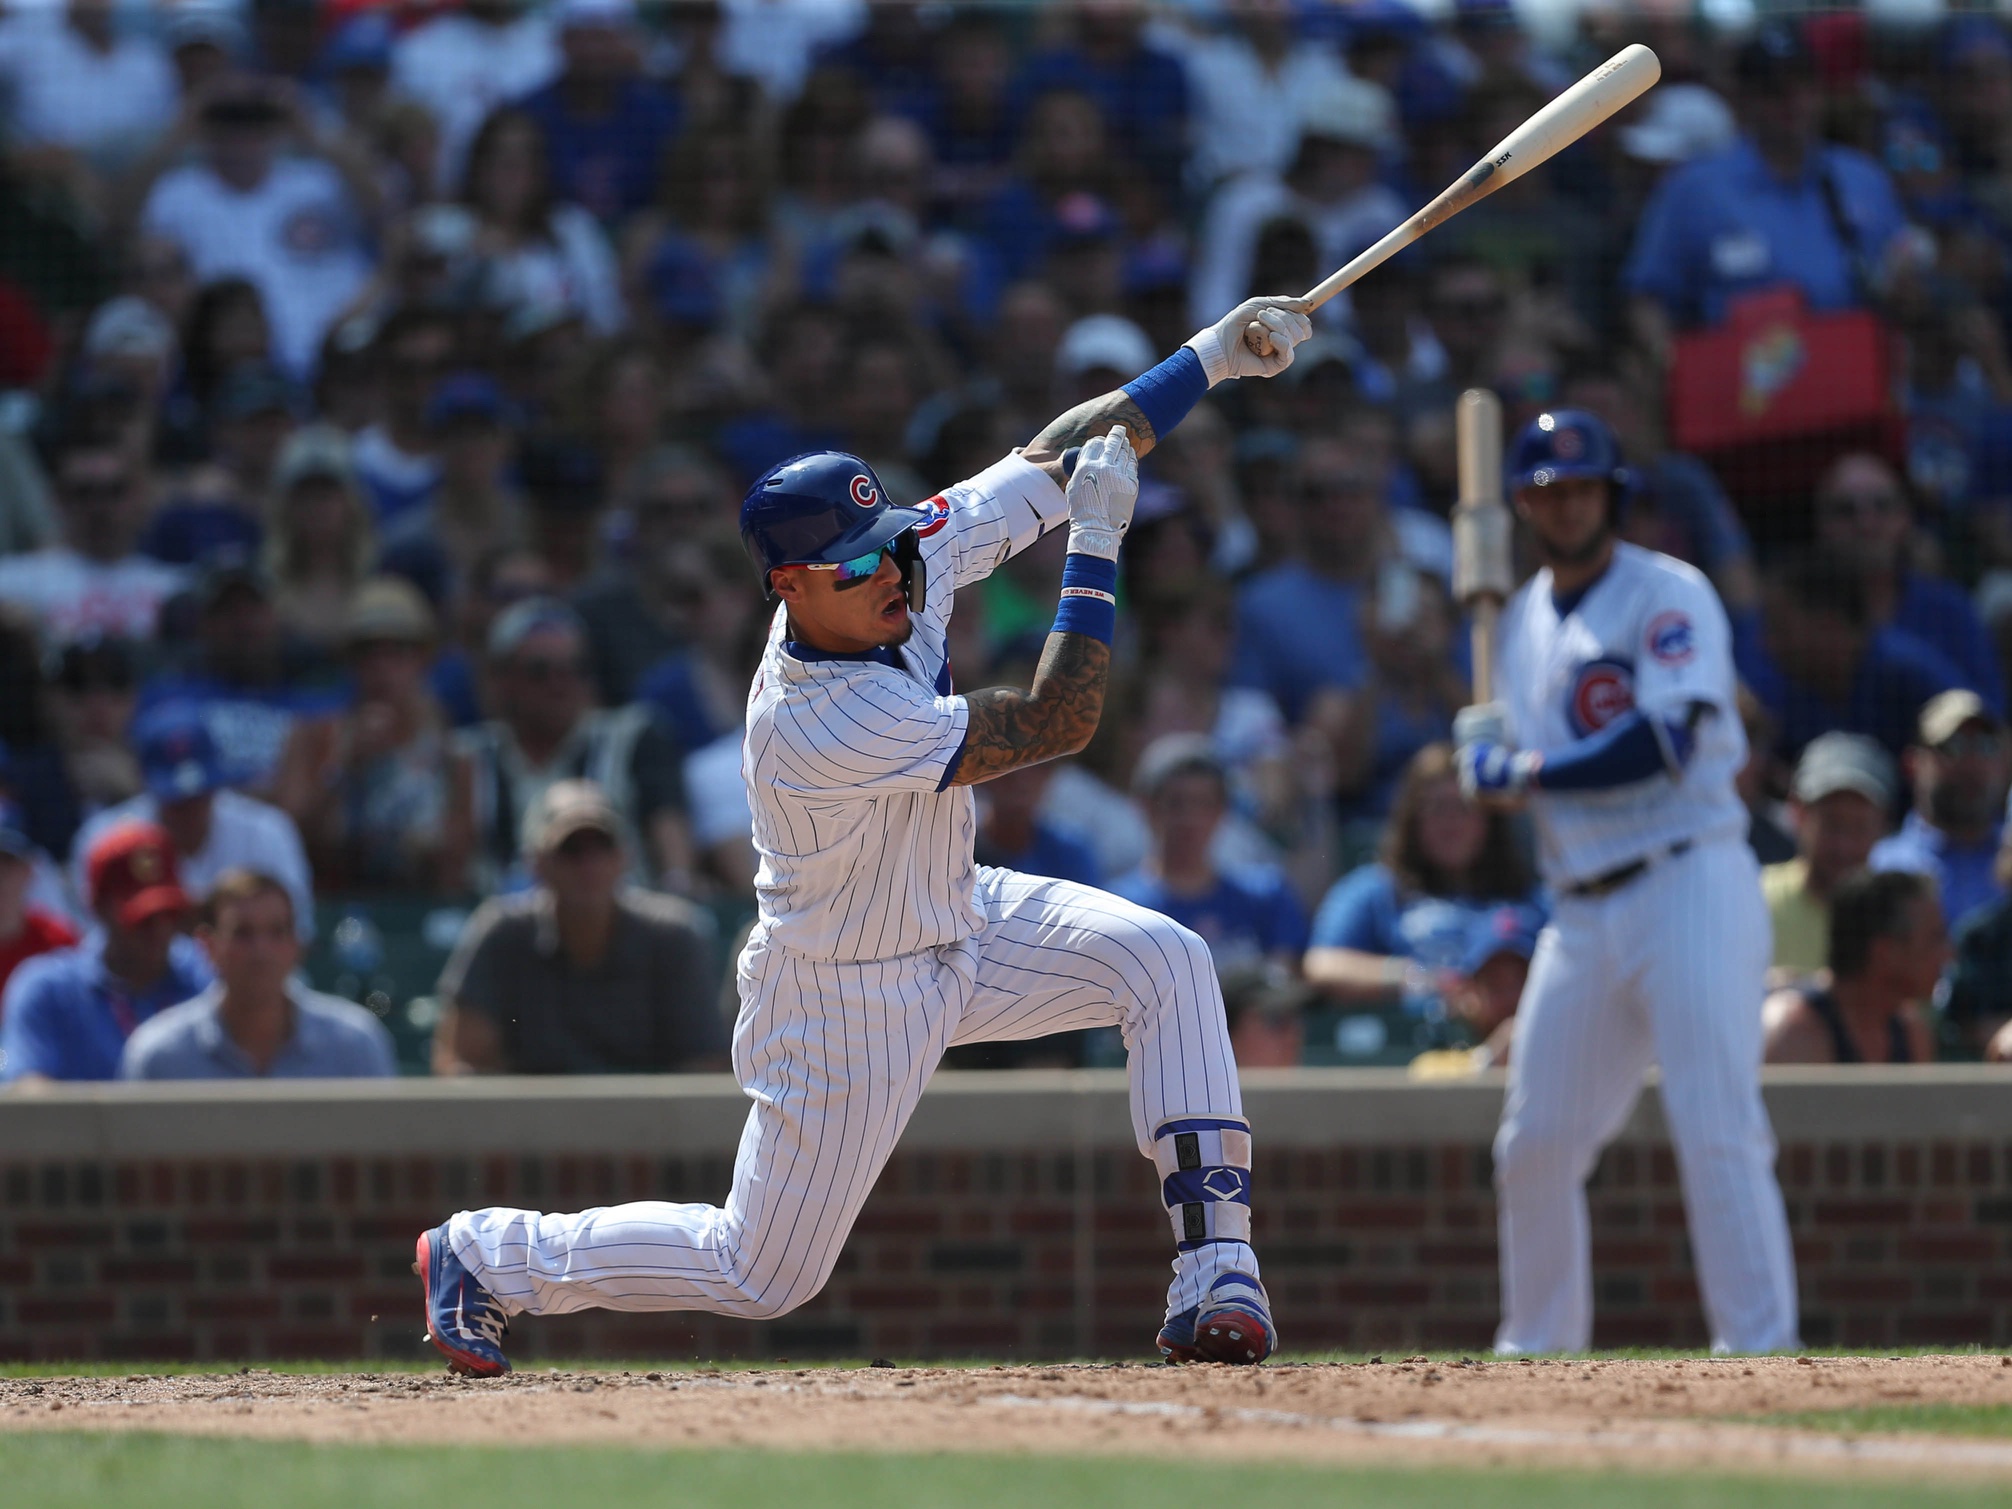 Aug 4, 2018; Chicago, IL, USA; Chicago Cubs third baseman Javier Baez (9) hits a single during the seventh inning against the San Diego Padres at Wrigley Field. Mandatory Credit: Dennis Wierzbicki-USA TODAY Sports